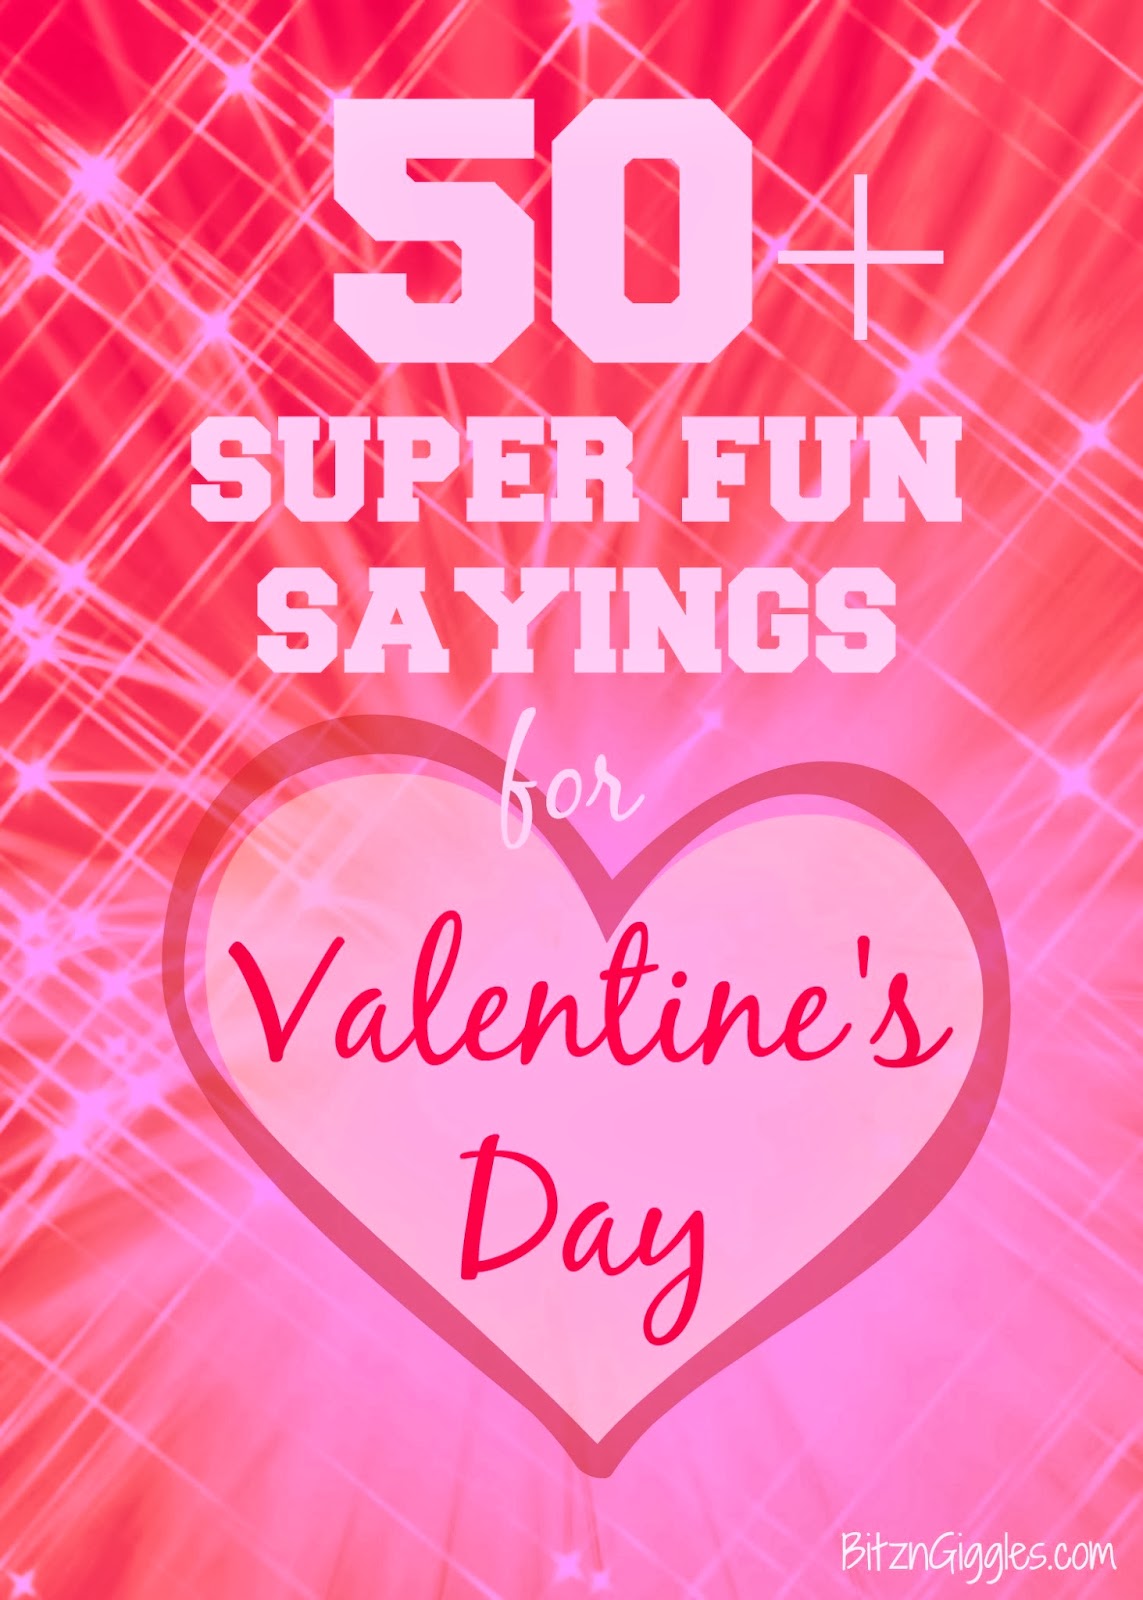 https://www.bitzngiggles.com/2014/02/50-super-fun-sayings-for-valentines-day.html